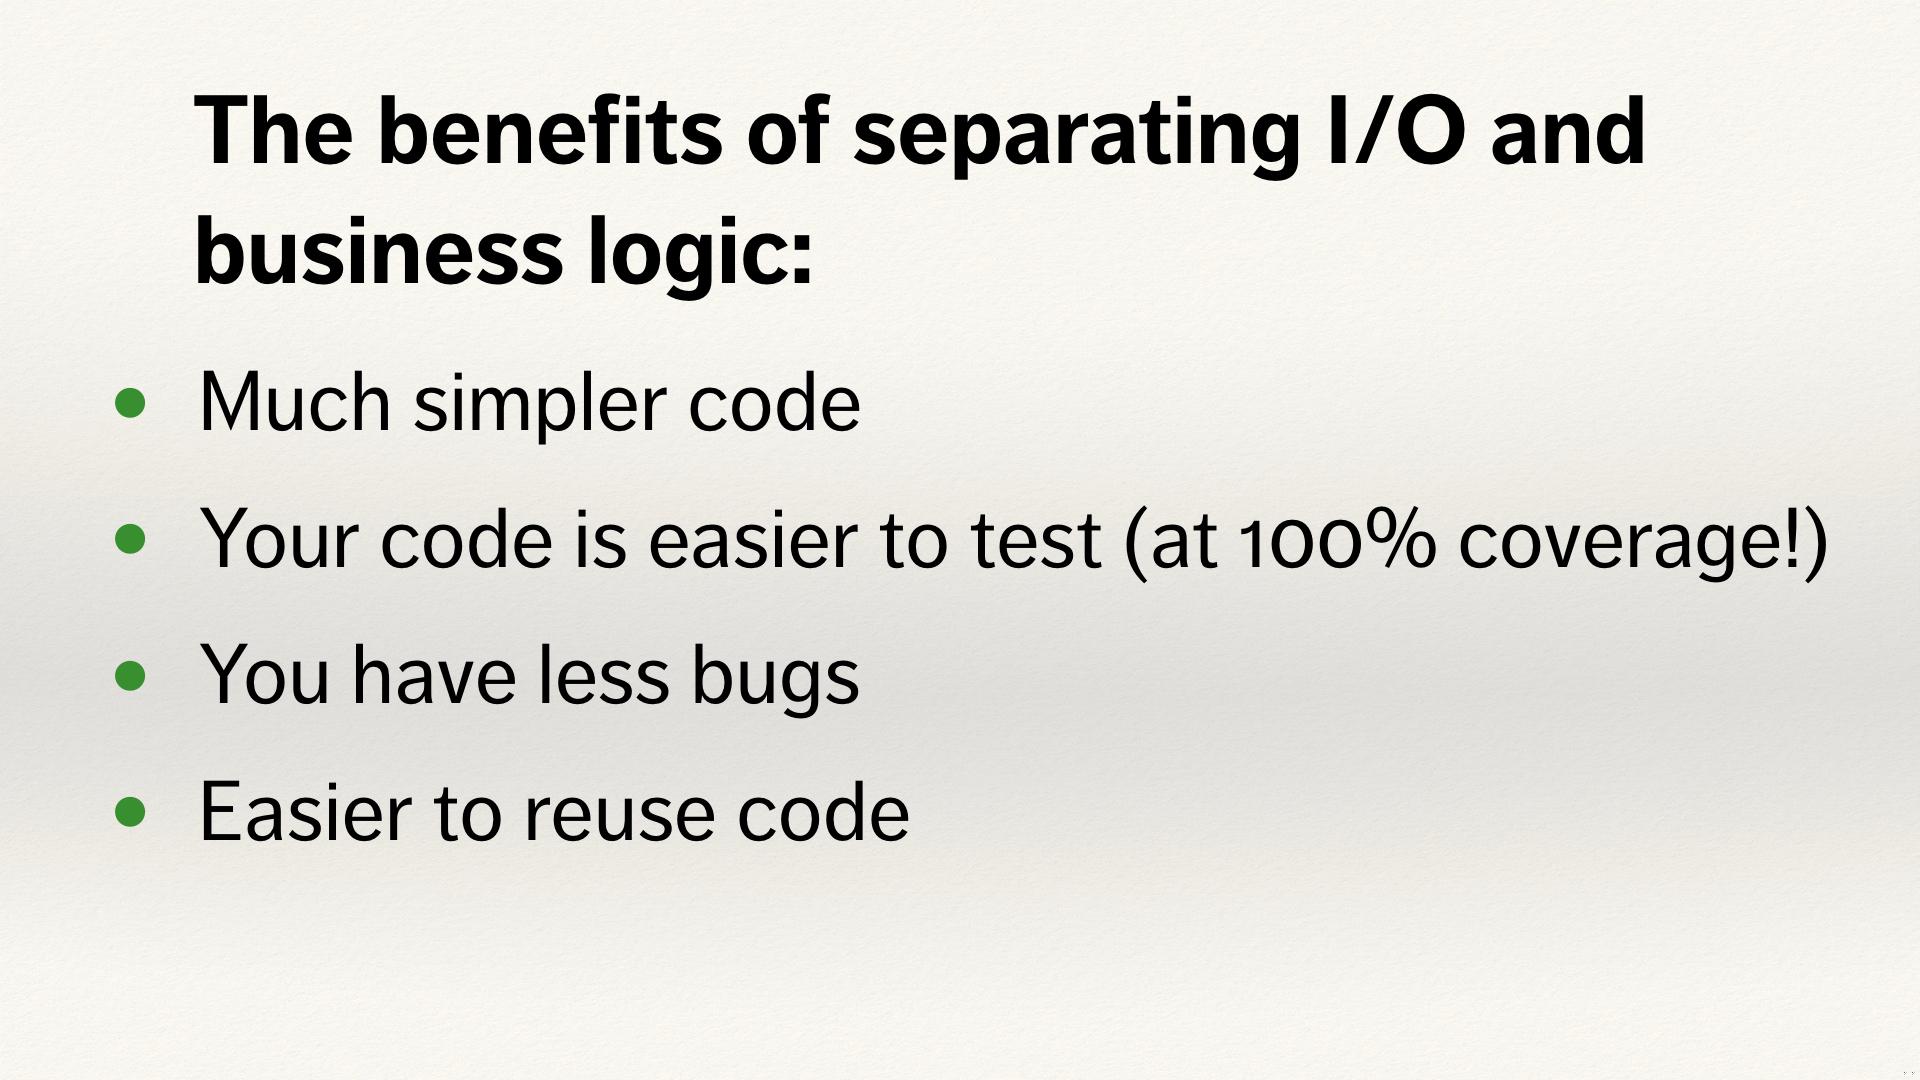 Summary slide. “The benefits of separating I/O and business logic”.